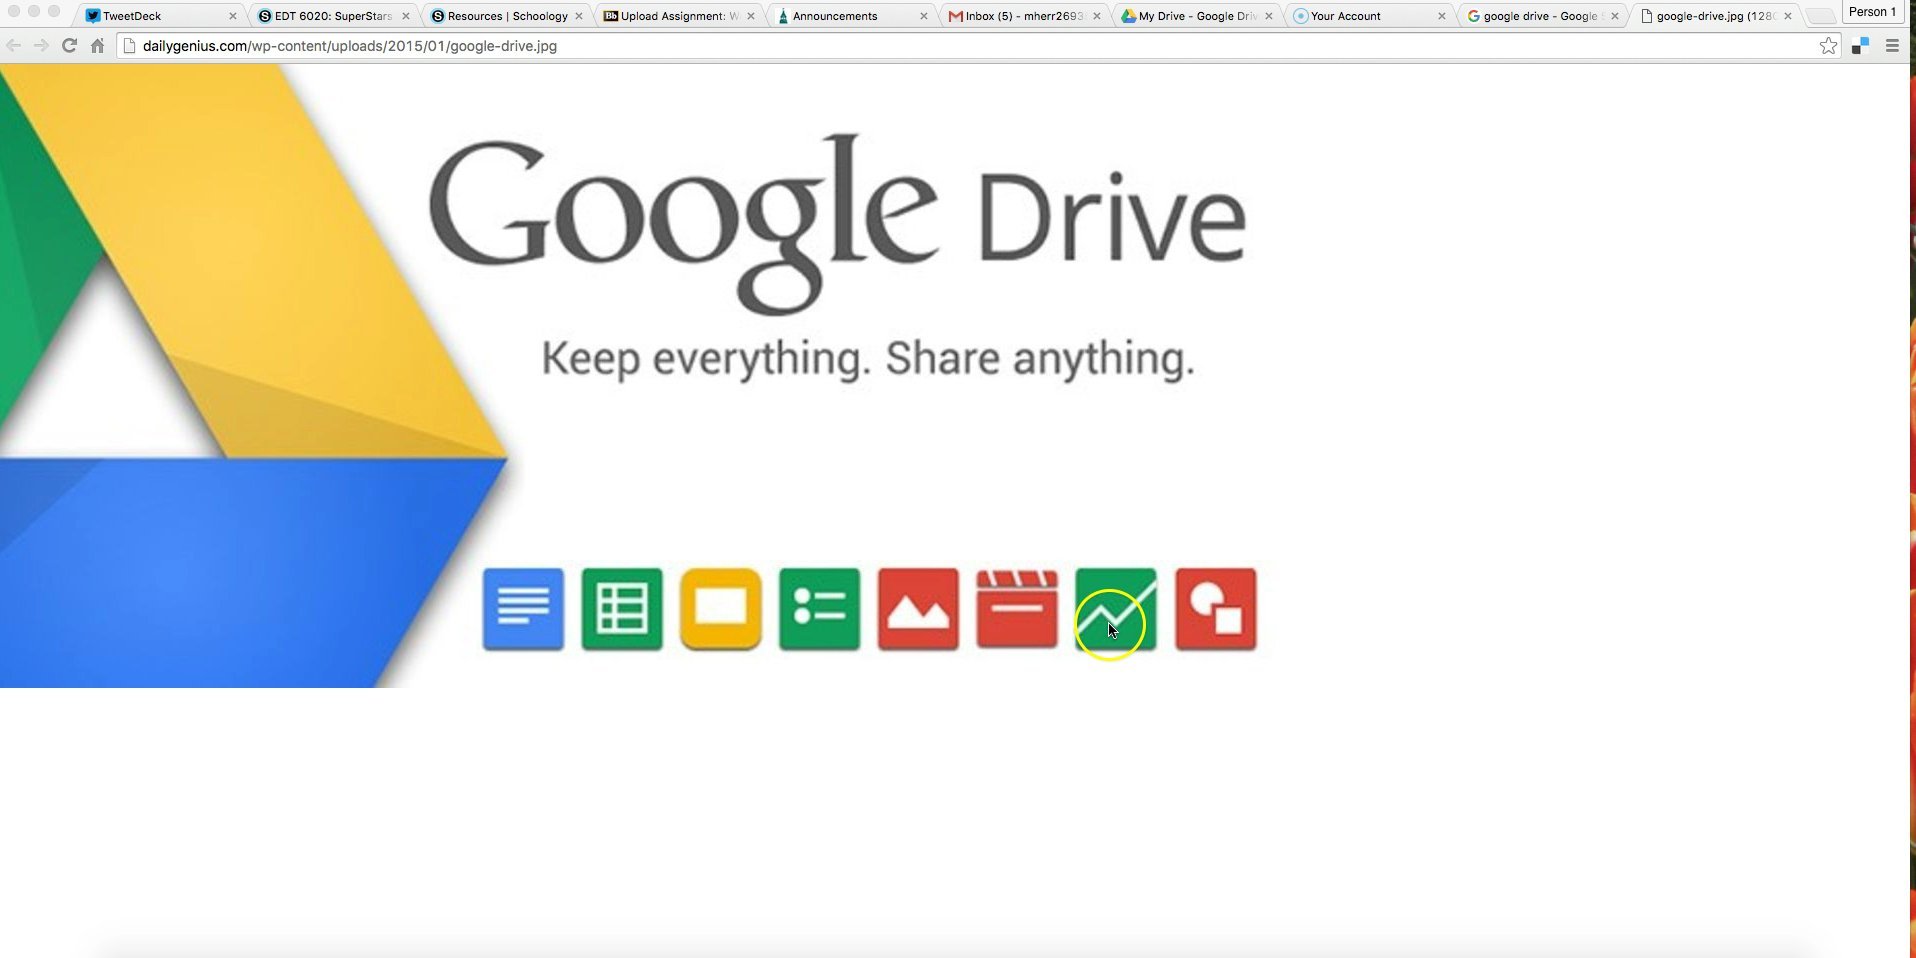 what is google drive and how to use it